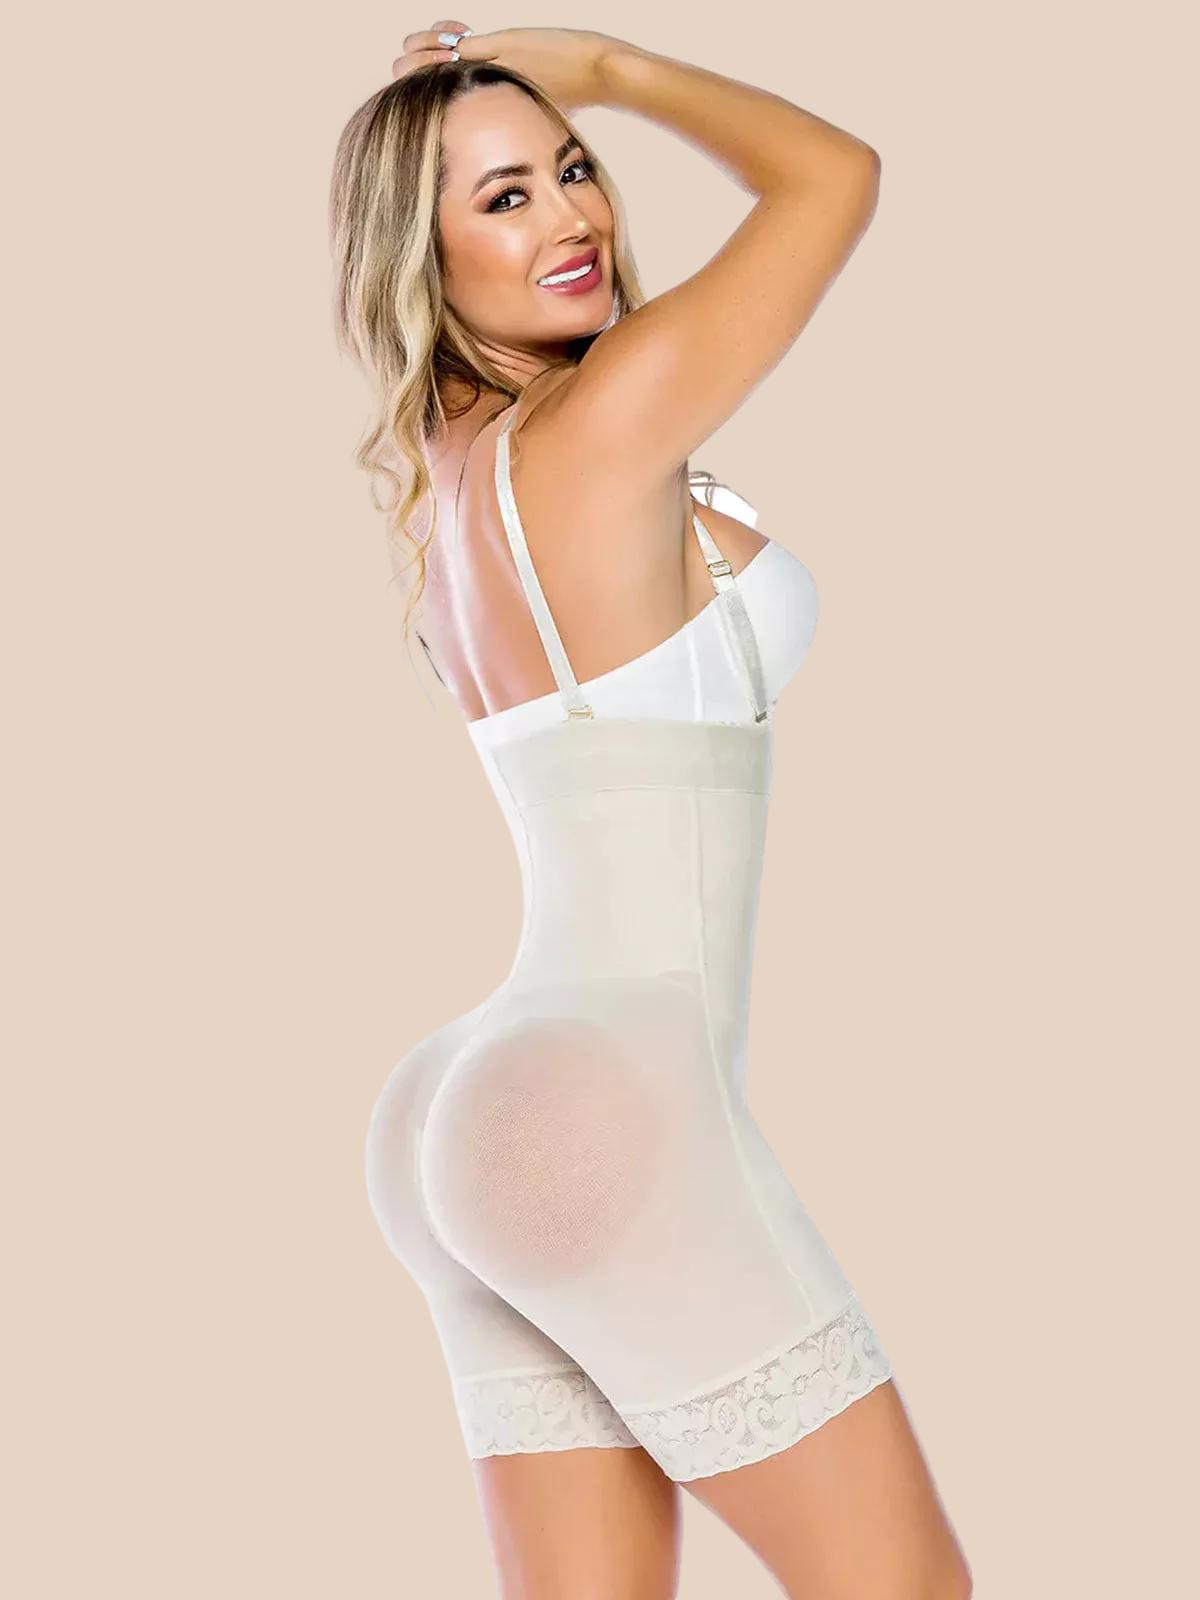 Colombian Reductive Girdle Body Shaper With Zipper For Women Tummy Control,  Zipper Closure, Flat Stomach, Full Shaping From Dartcloth, $21.49